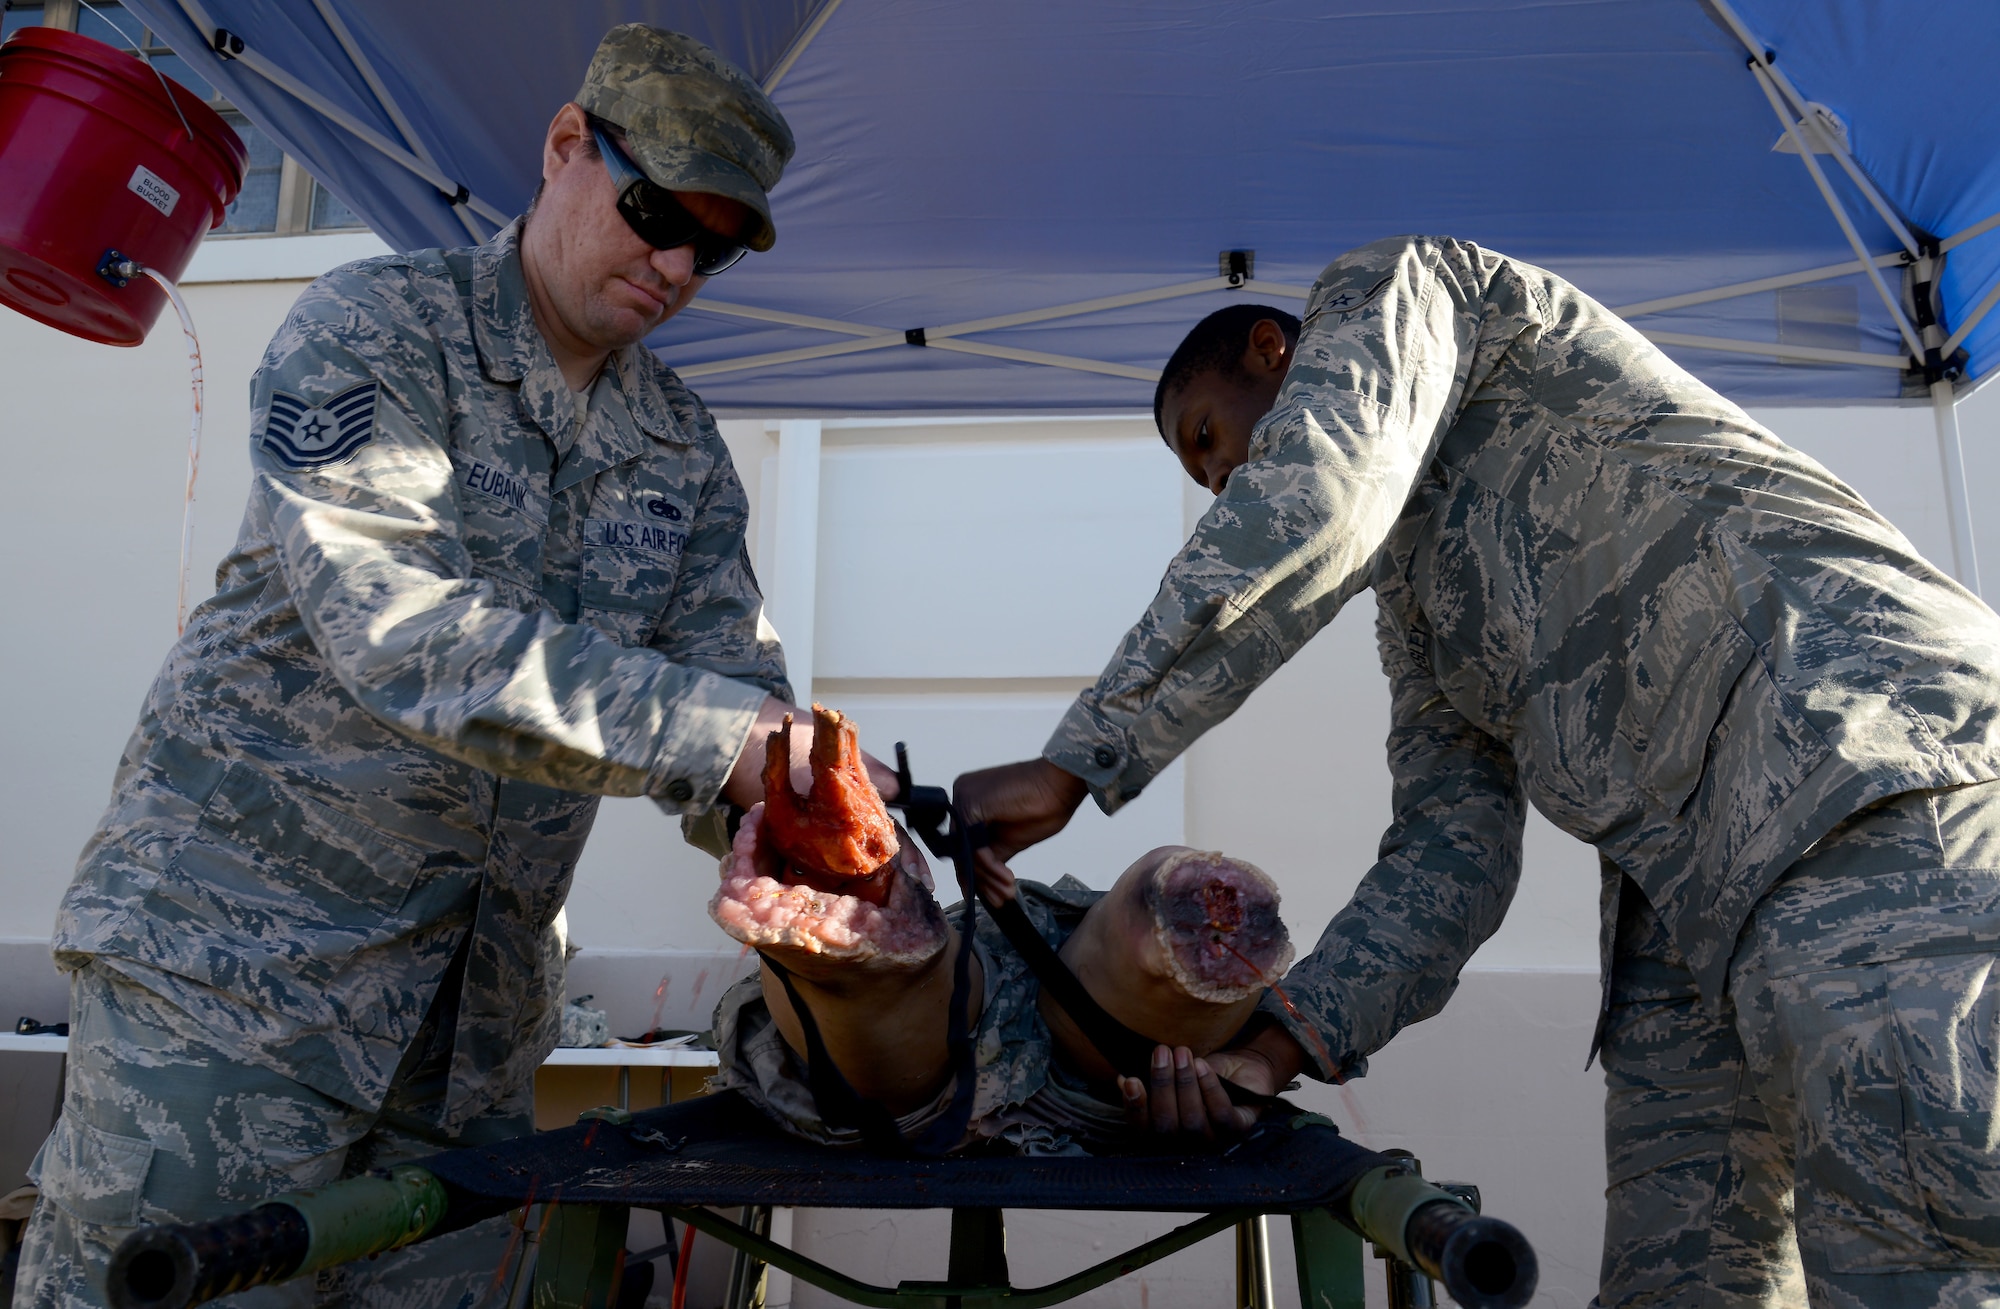 U.S. Air Force Airmen practice applying a tourniquet to a training manikin during Ability to Survive and Operate (ATSO) training at MacDill Air Force Base, Fla., Jan. 26, 2018.